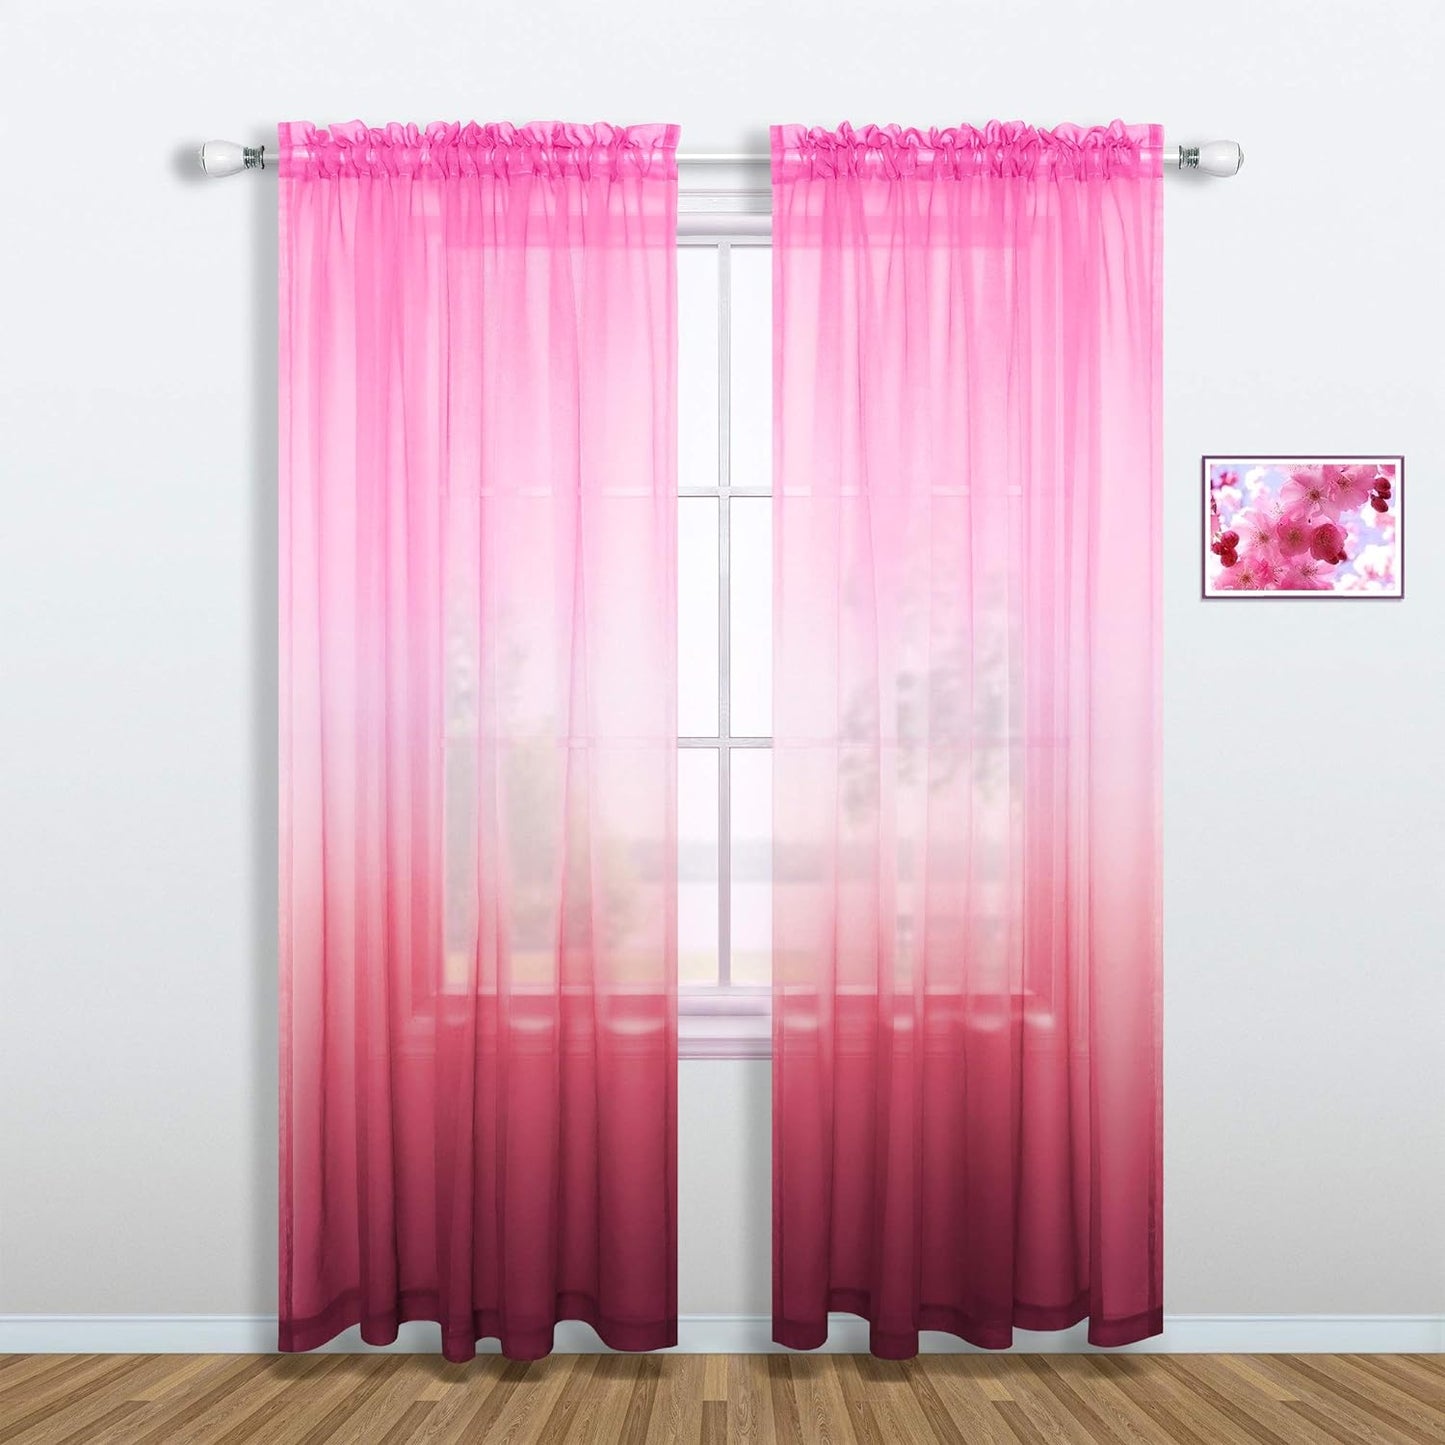 Pink and Purple Curtains for Girls Bedroom Decor Set 1 Single Panel Pocket Window Voile Pastel Sheer Ombre Rainbow Curtain for Kid Room Decoration Teen Princess 63 Inch Length Gradient Lilac Lavender  MRS.NATURALL TEXTILE Pink And Wildberry 52X84 